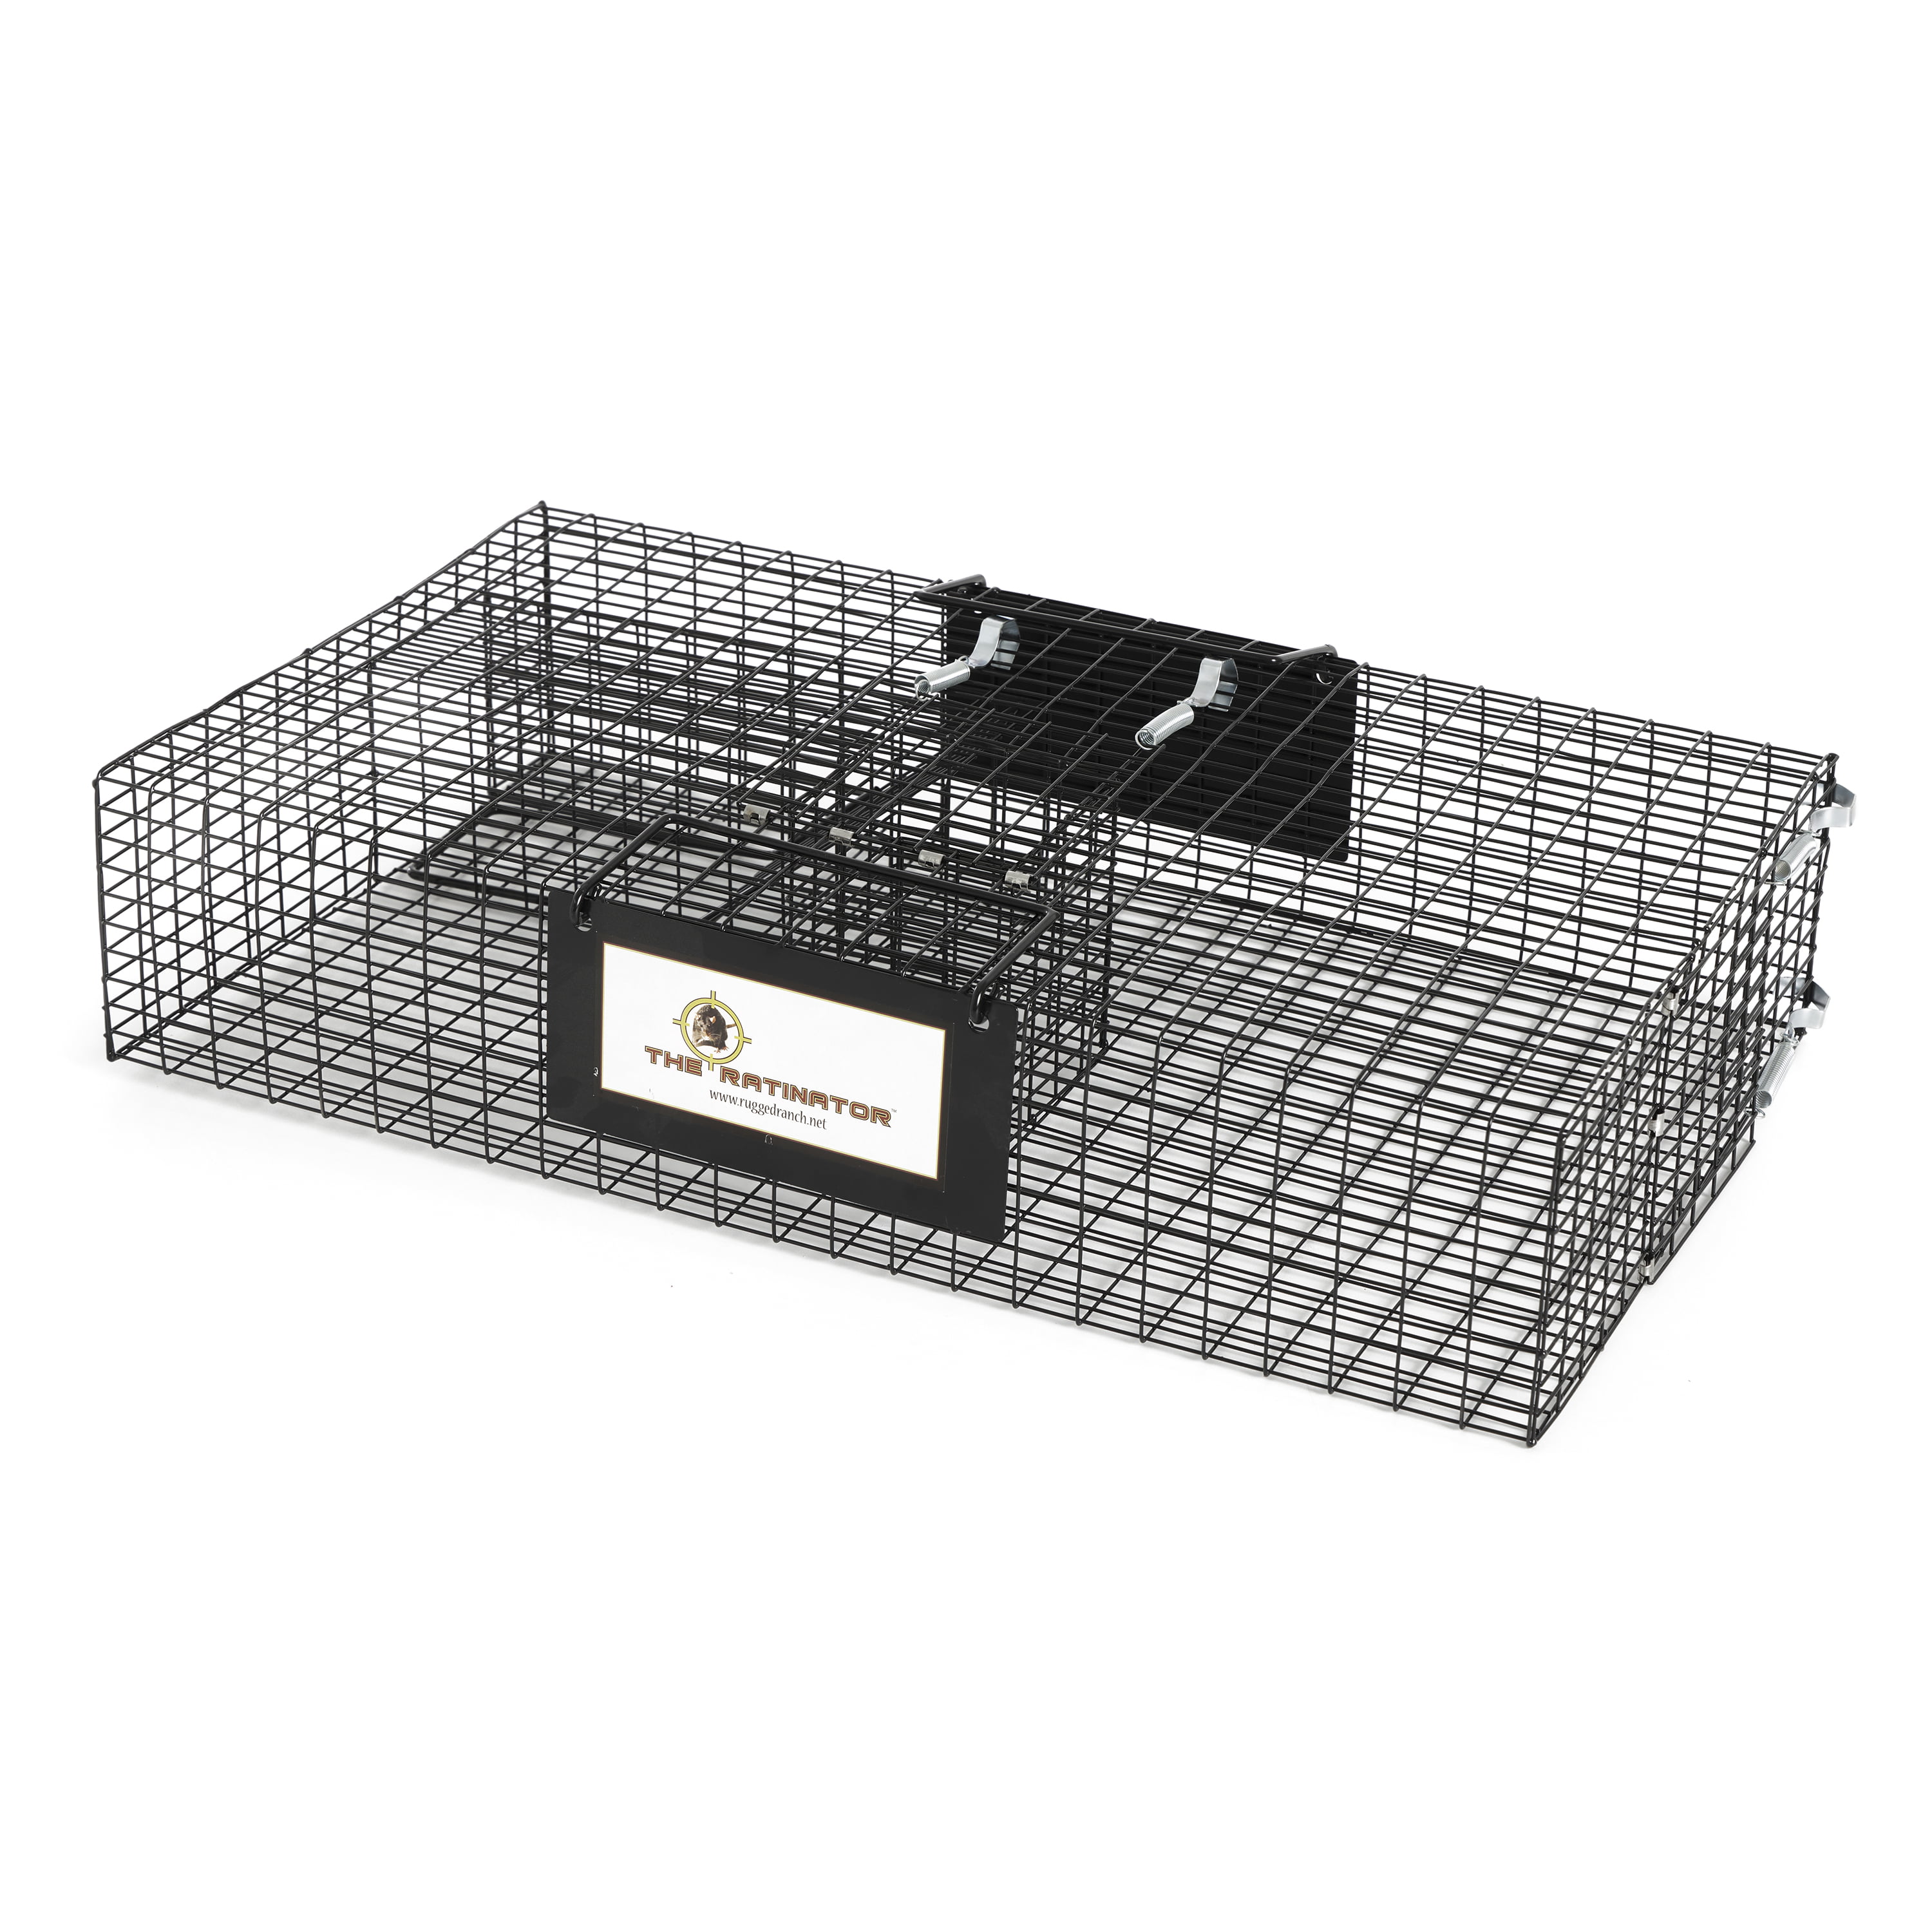 Tomahawk Squirrel Pack With Trap and Release Doors - Major Supply Corp